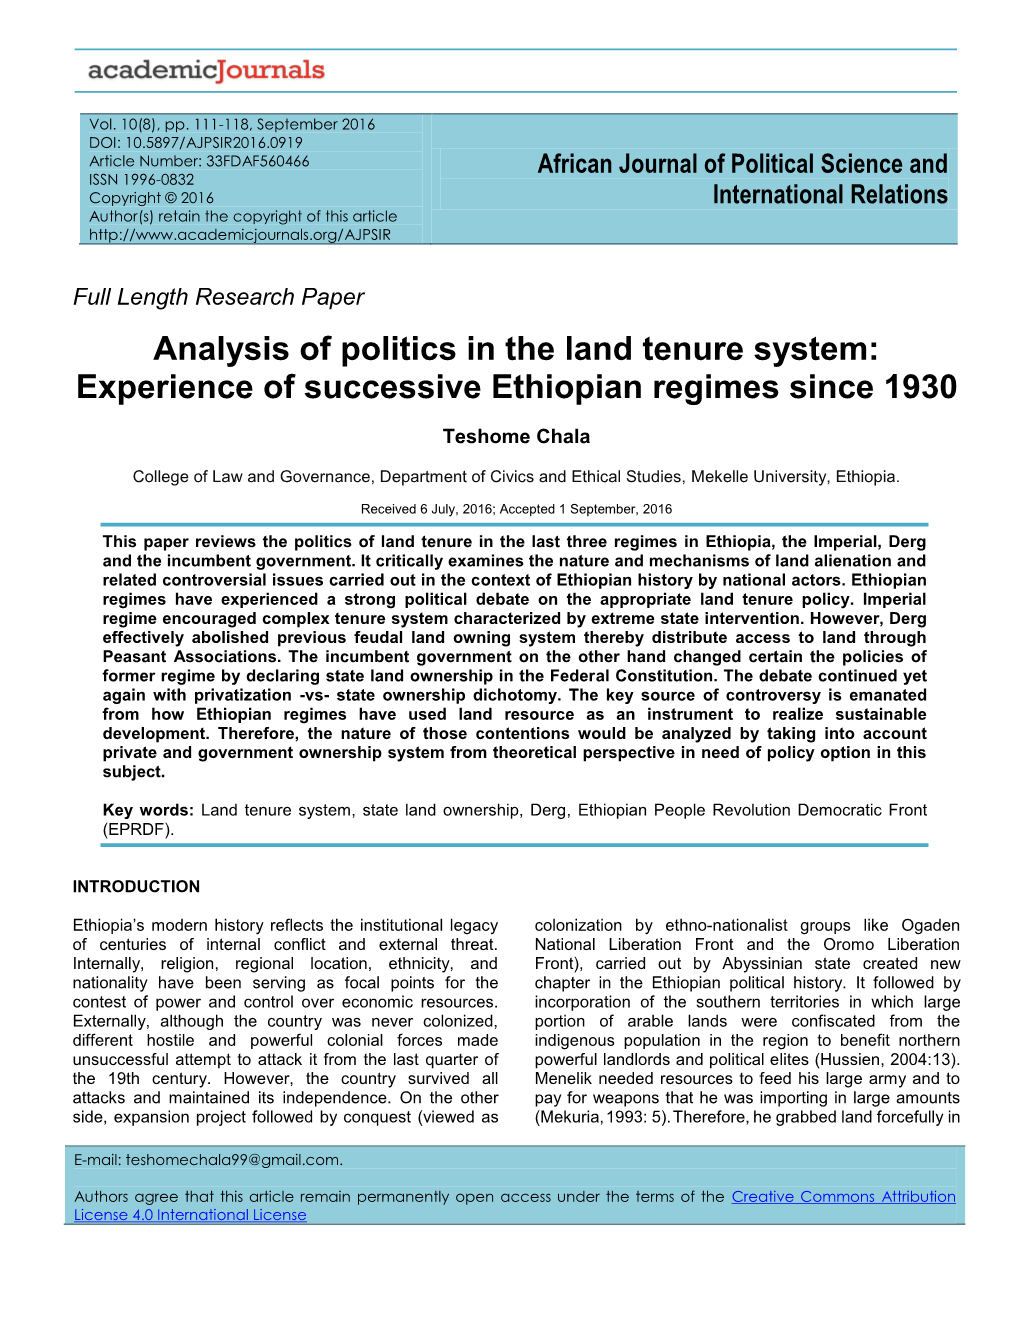 Analysis of Politics in the Land Tenure System: Experience of Successive Ethiopian Regimes Since 1930